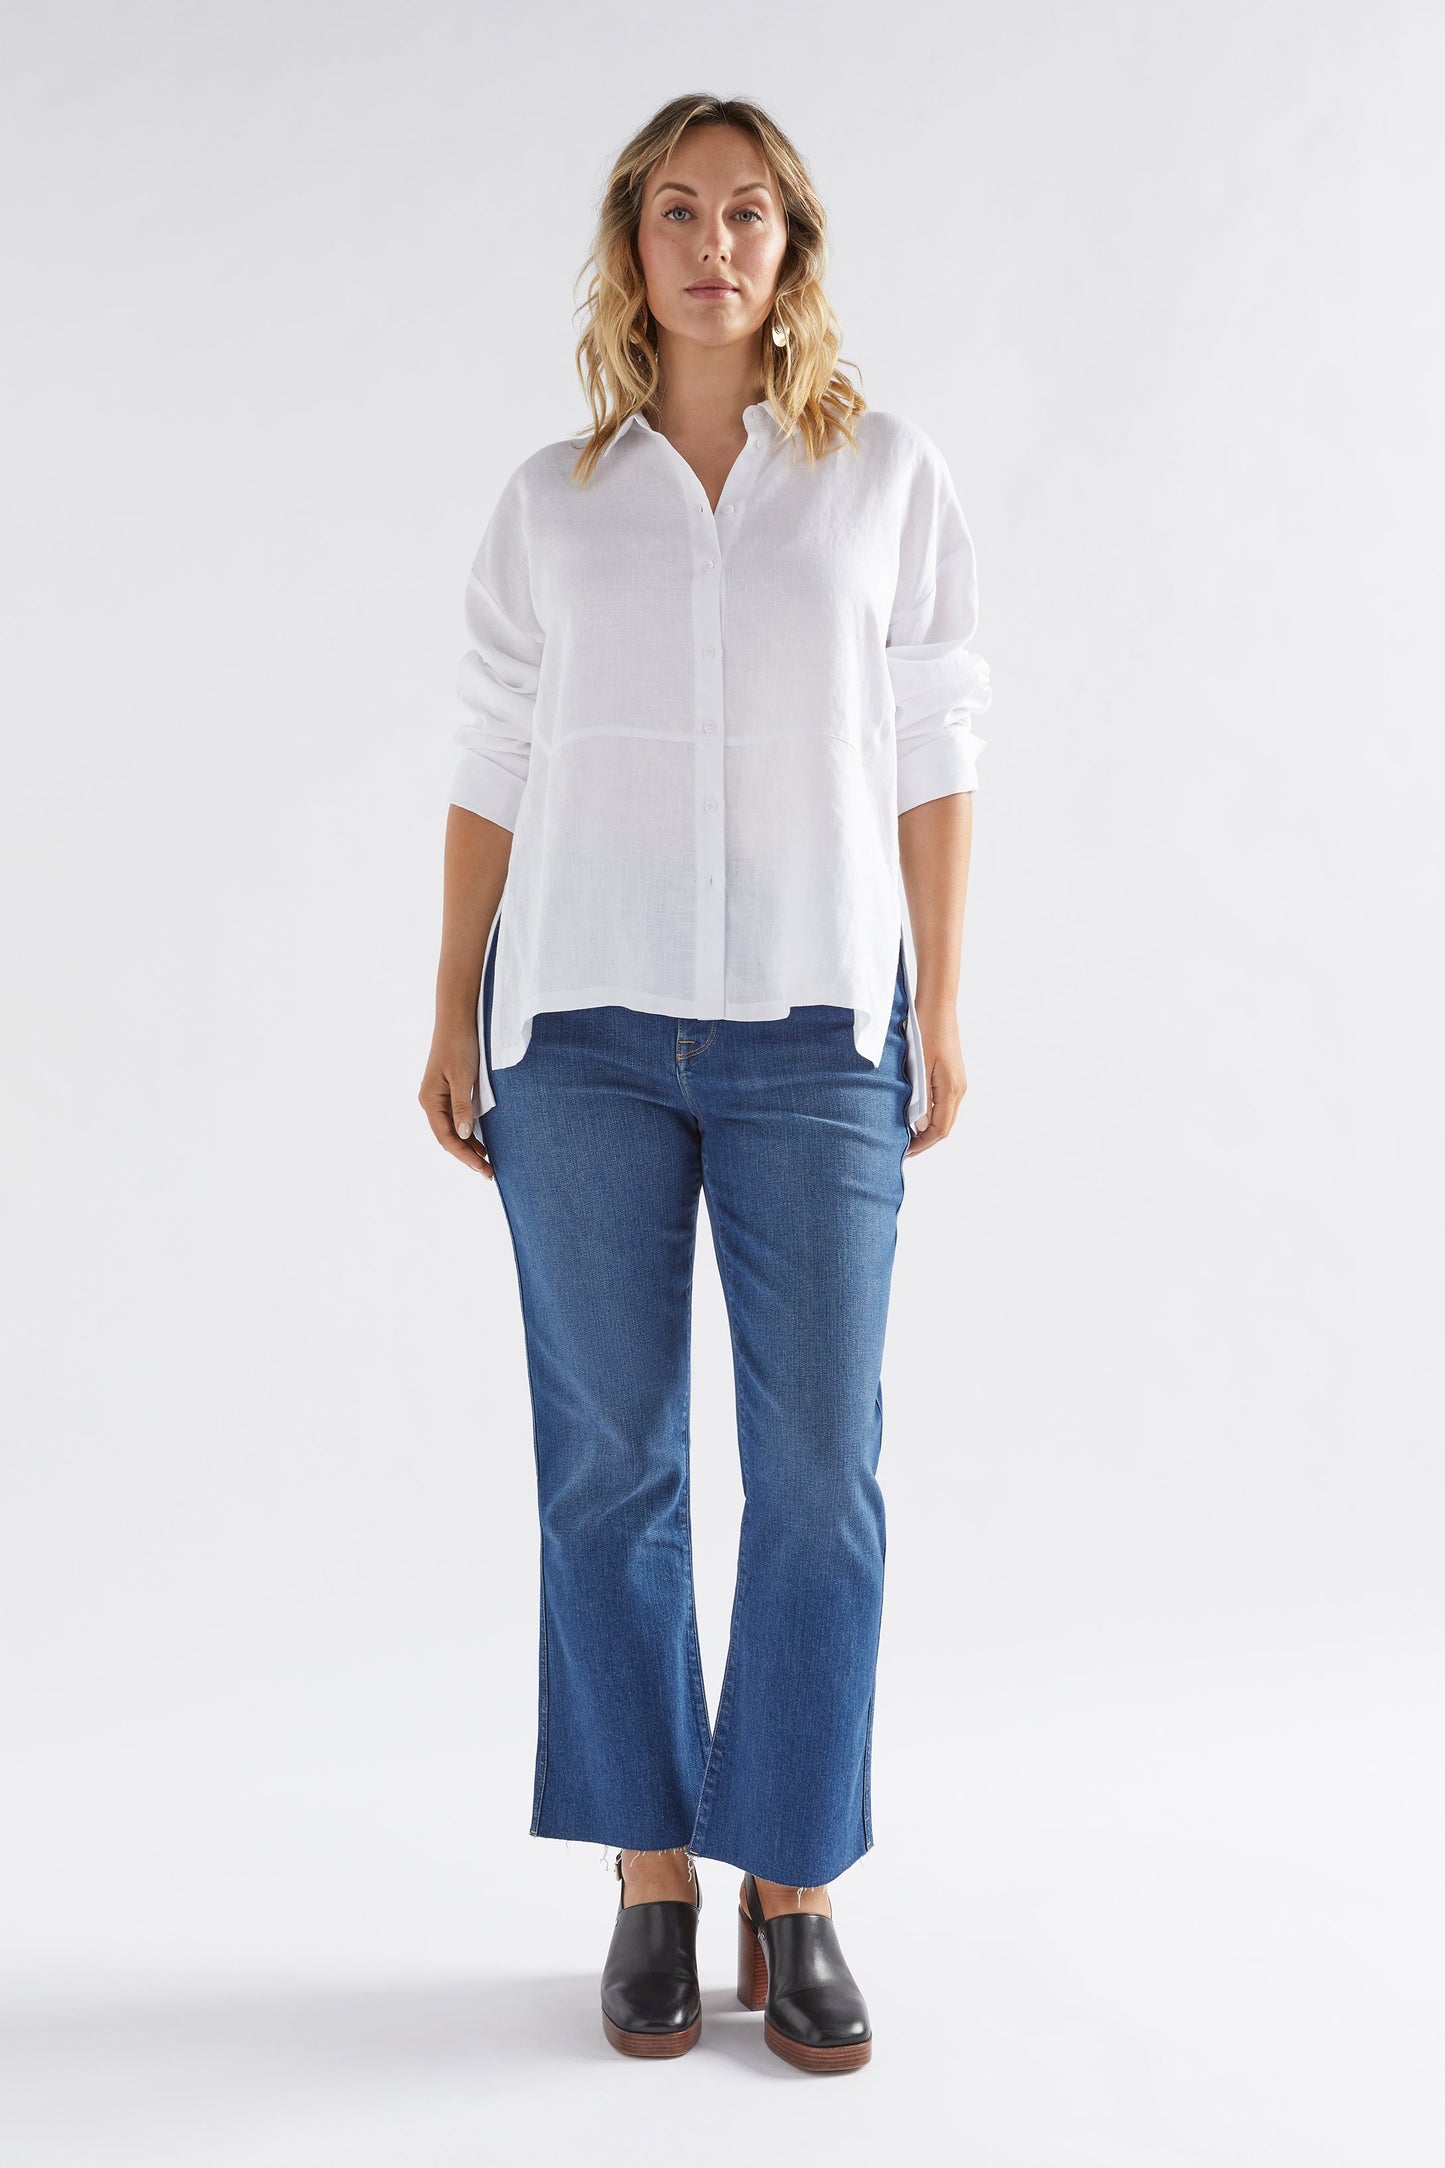 Stilla Linen Shirt with High-Low Hem and Back Pleat Detail Model Front Full Body | WHITE